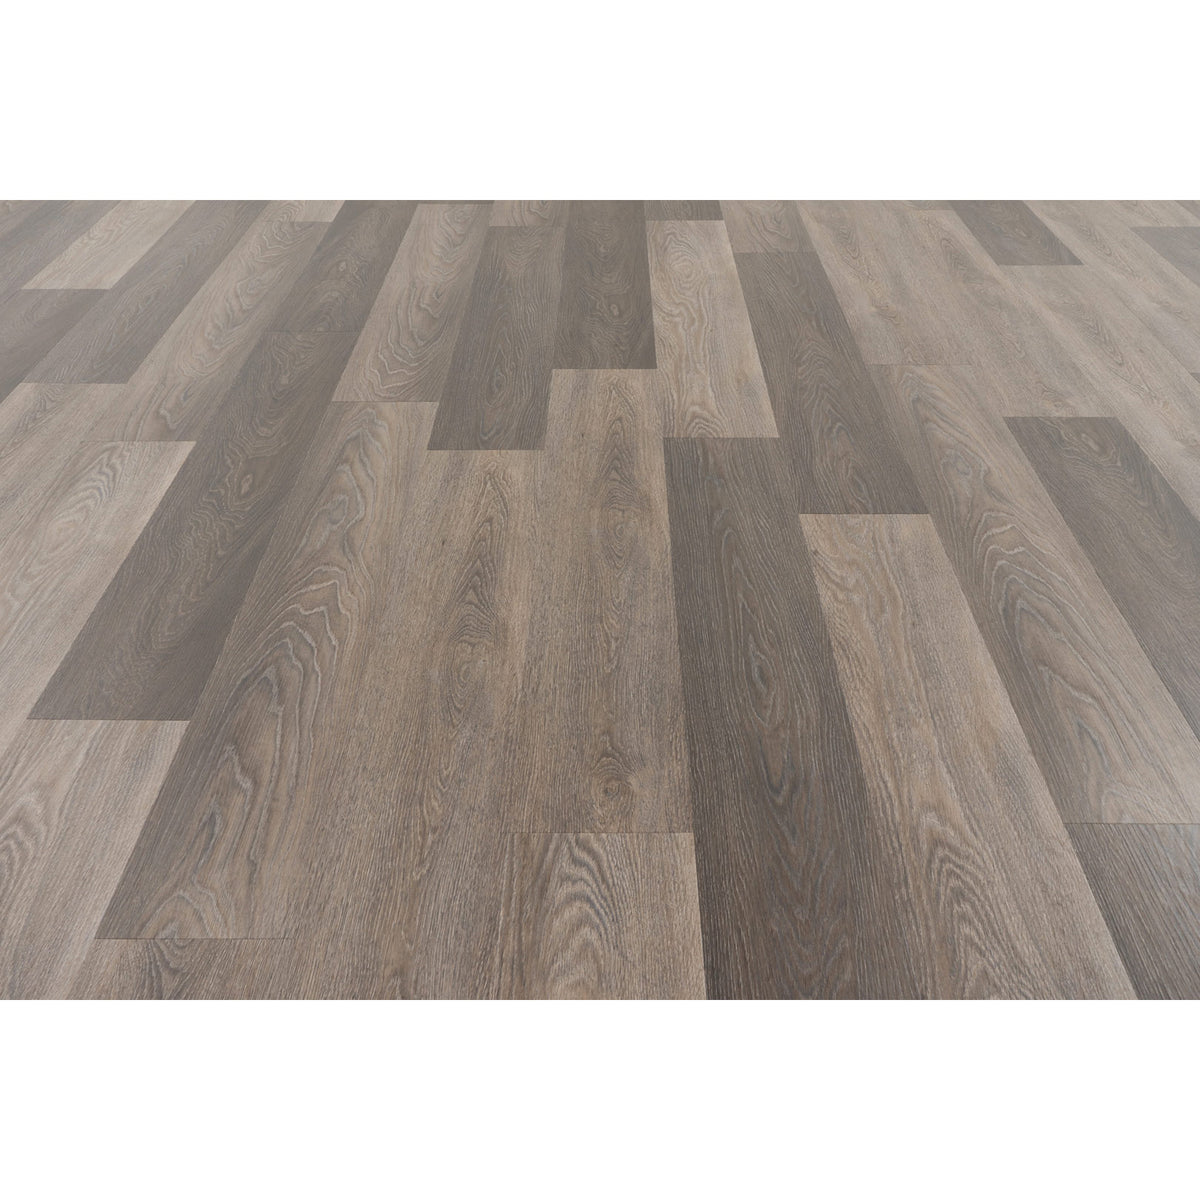 Provenza Floors - Uptown Chic Luxury Vinyl Plank - Forever Friends